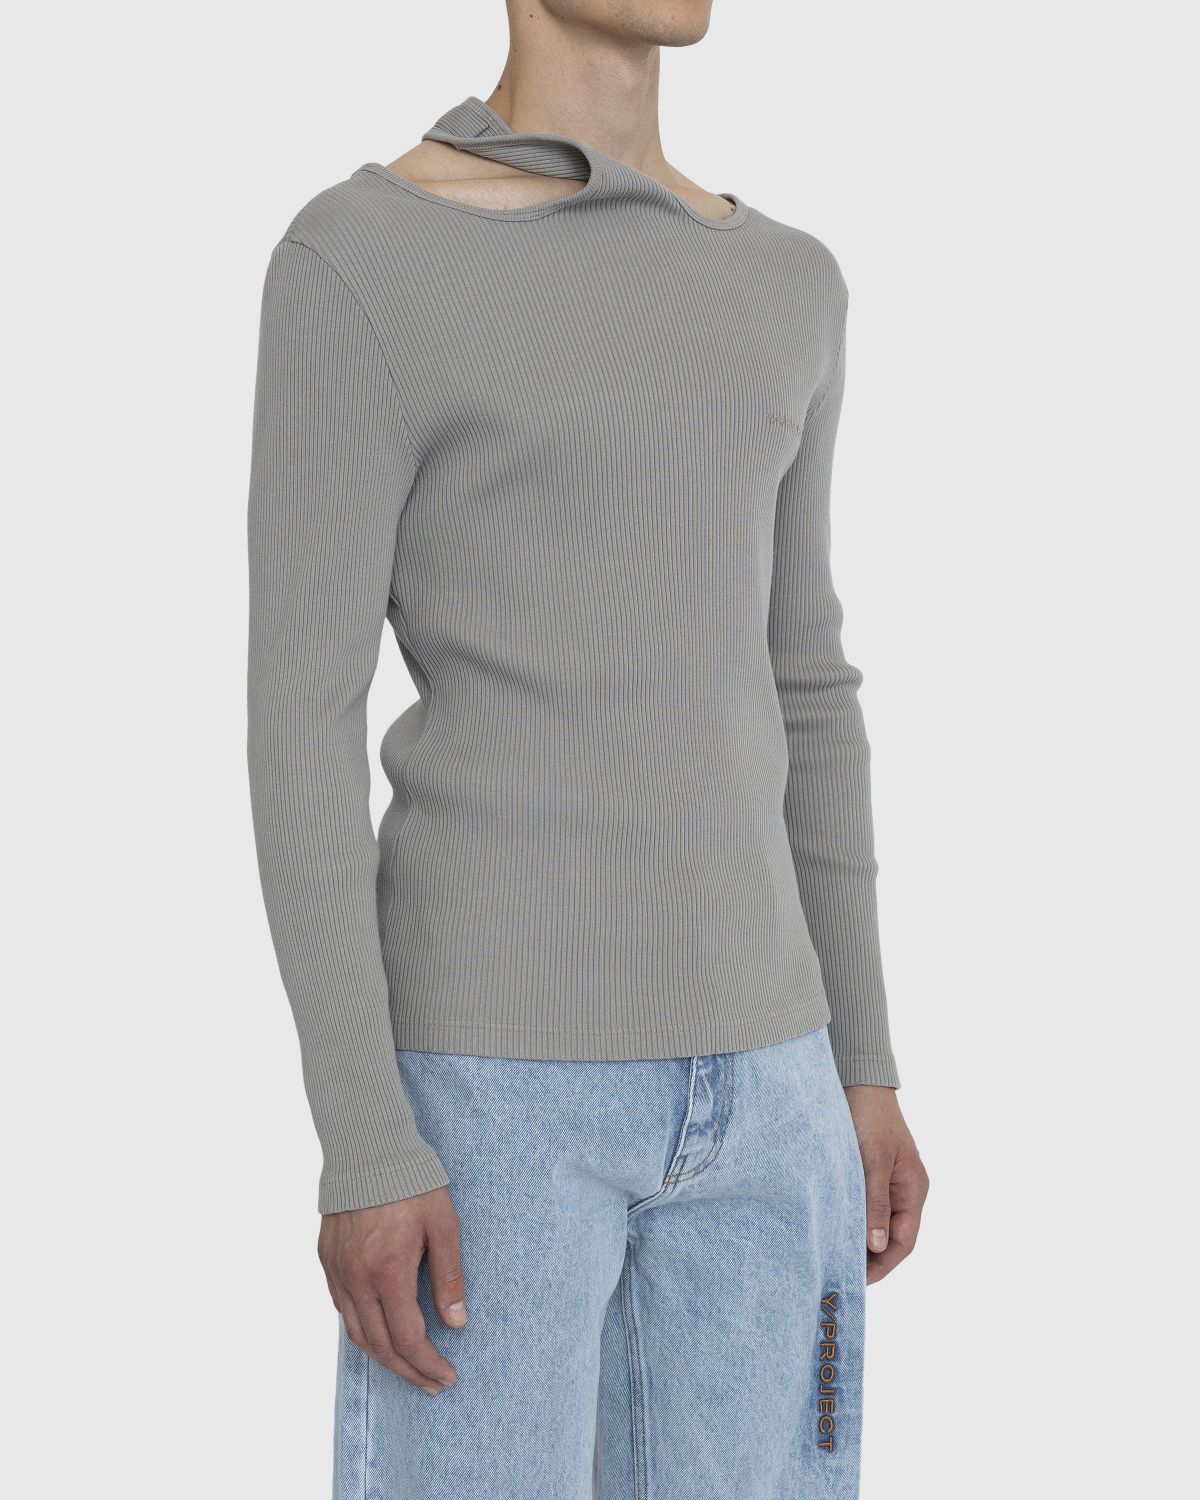 Y/Project – Classic Double Collar T-Shirt Taupe - T-shirts - Grey - Image 3